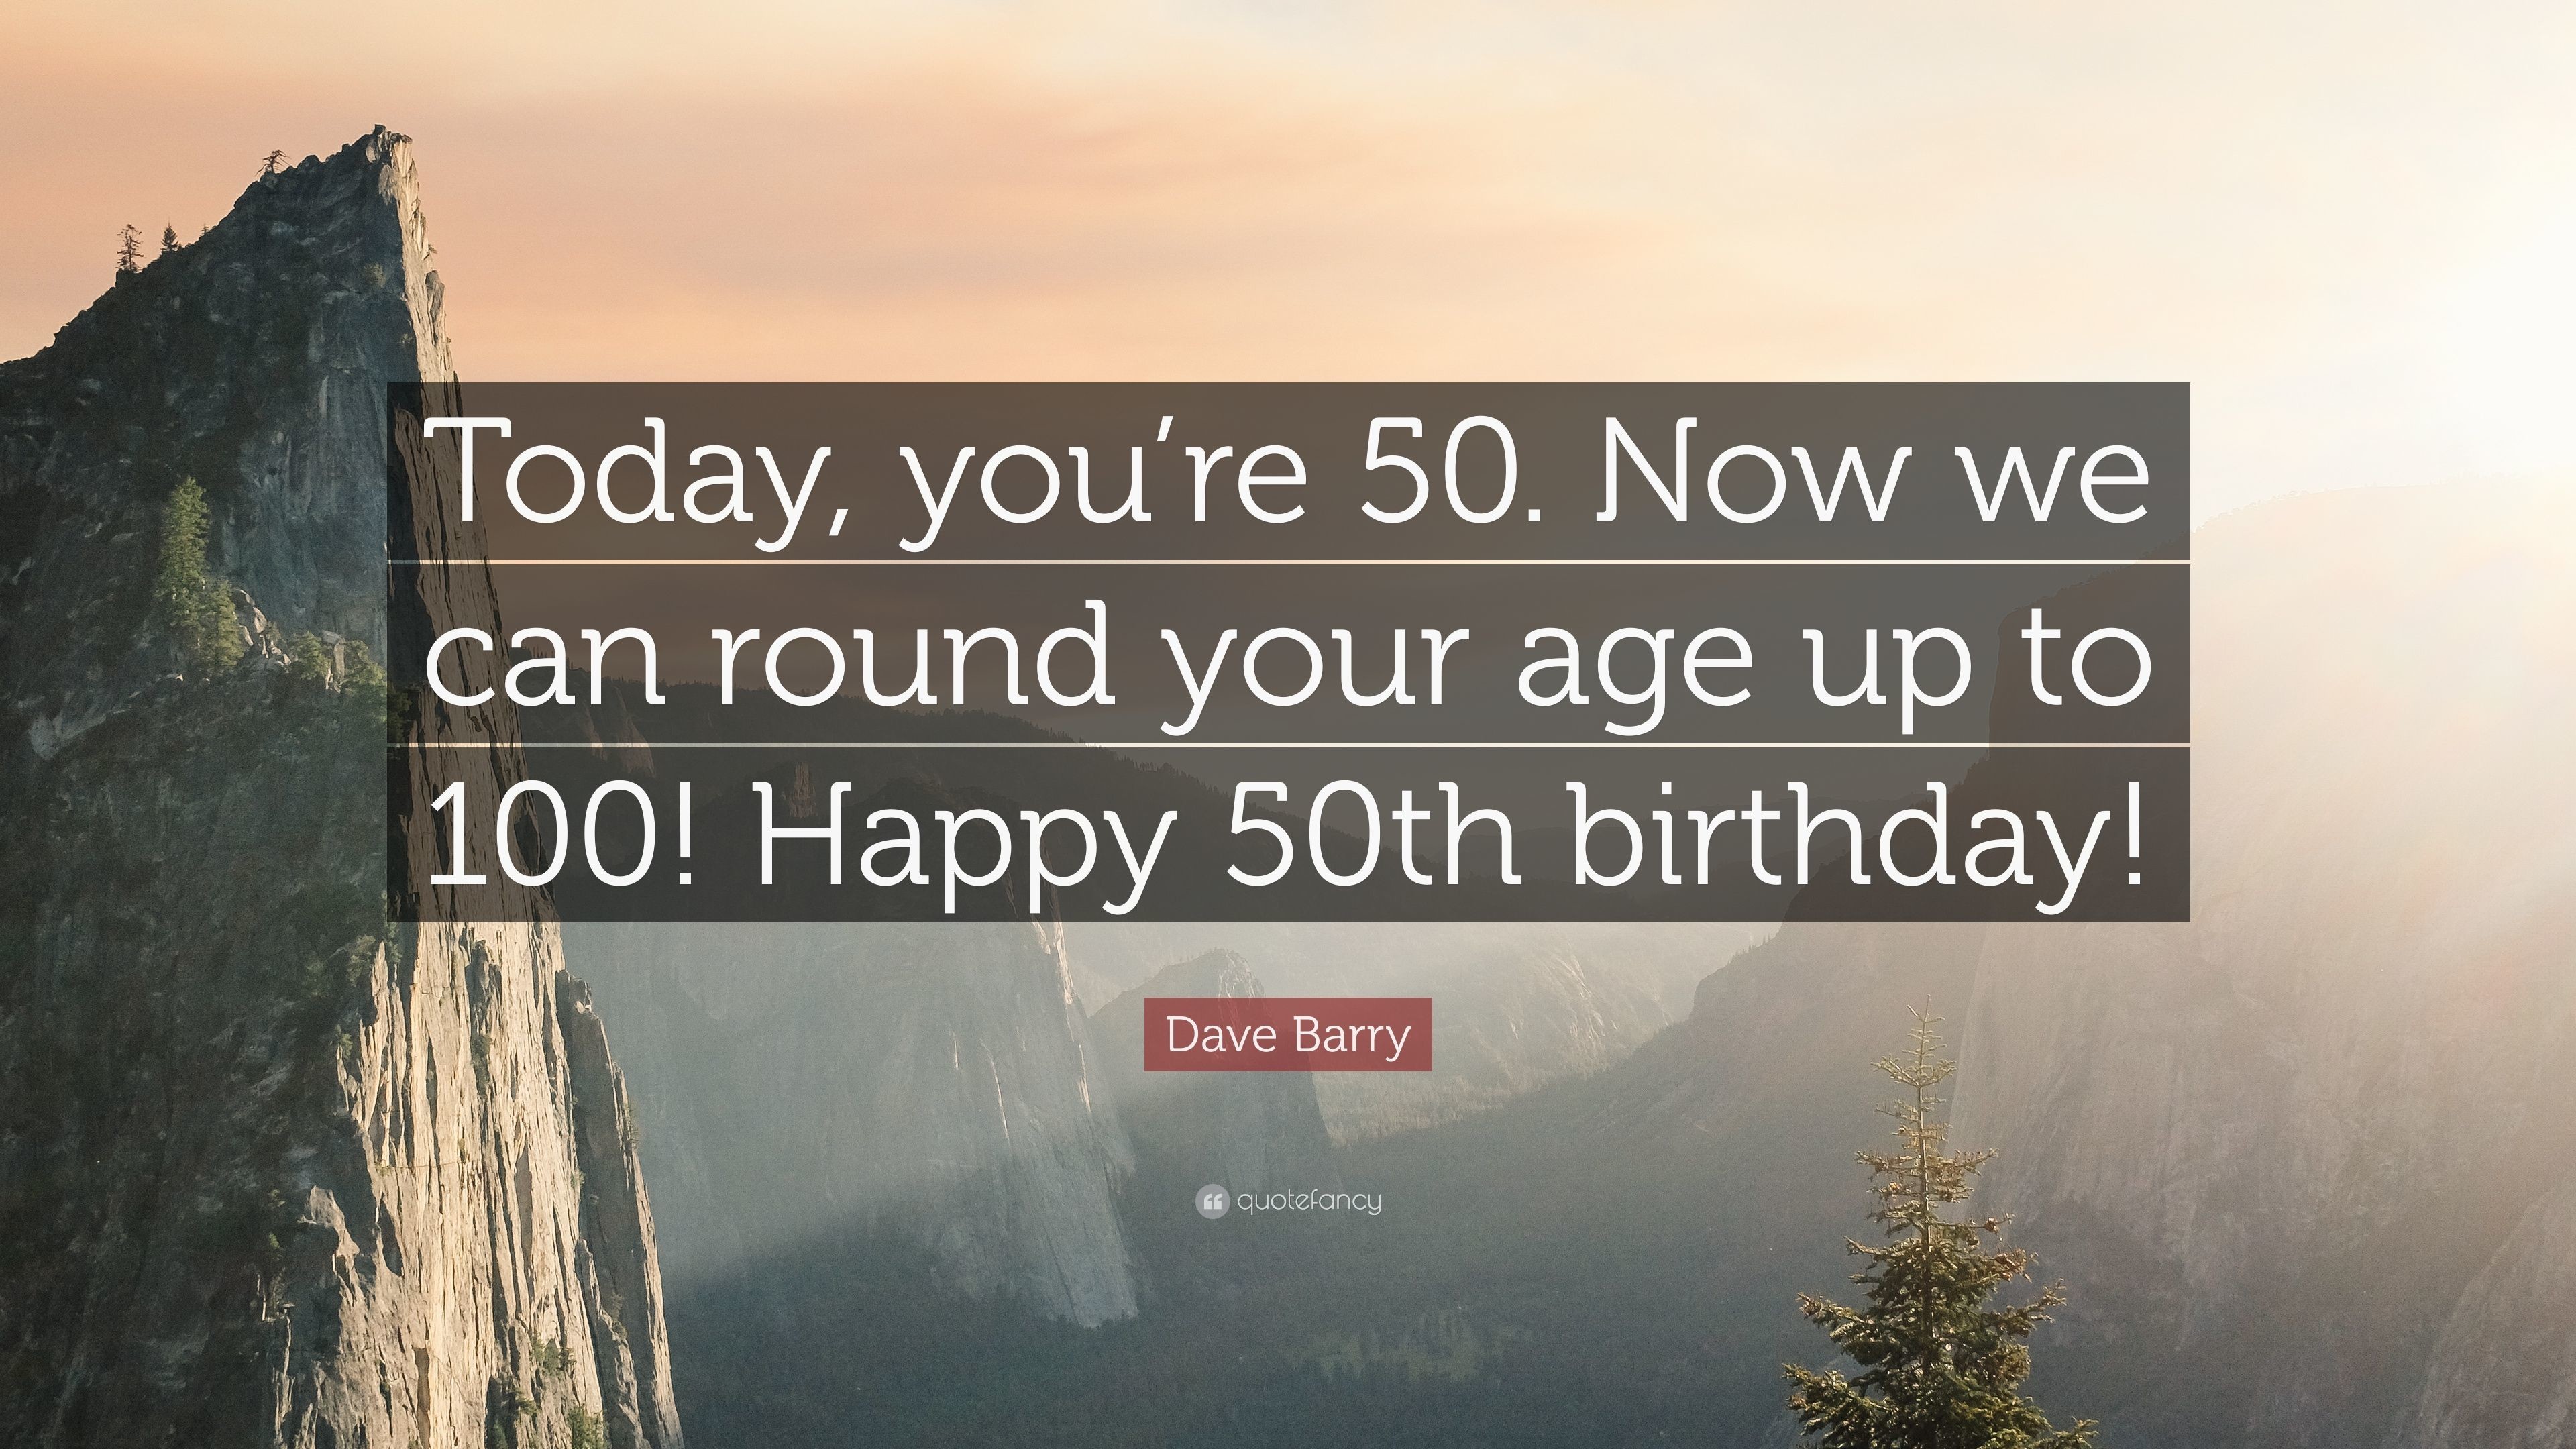 3840x2160 Dave Barry Quote: “Today, you're 50. Now we can round